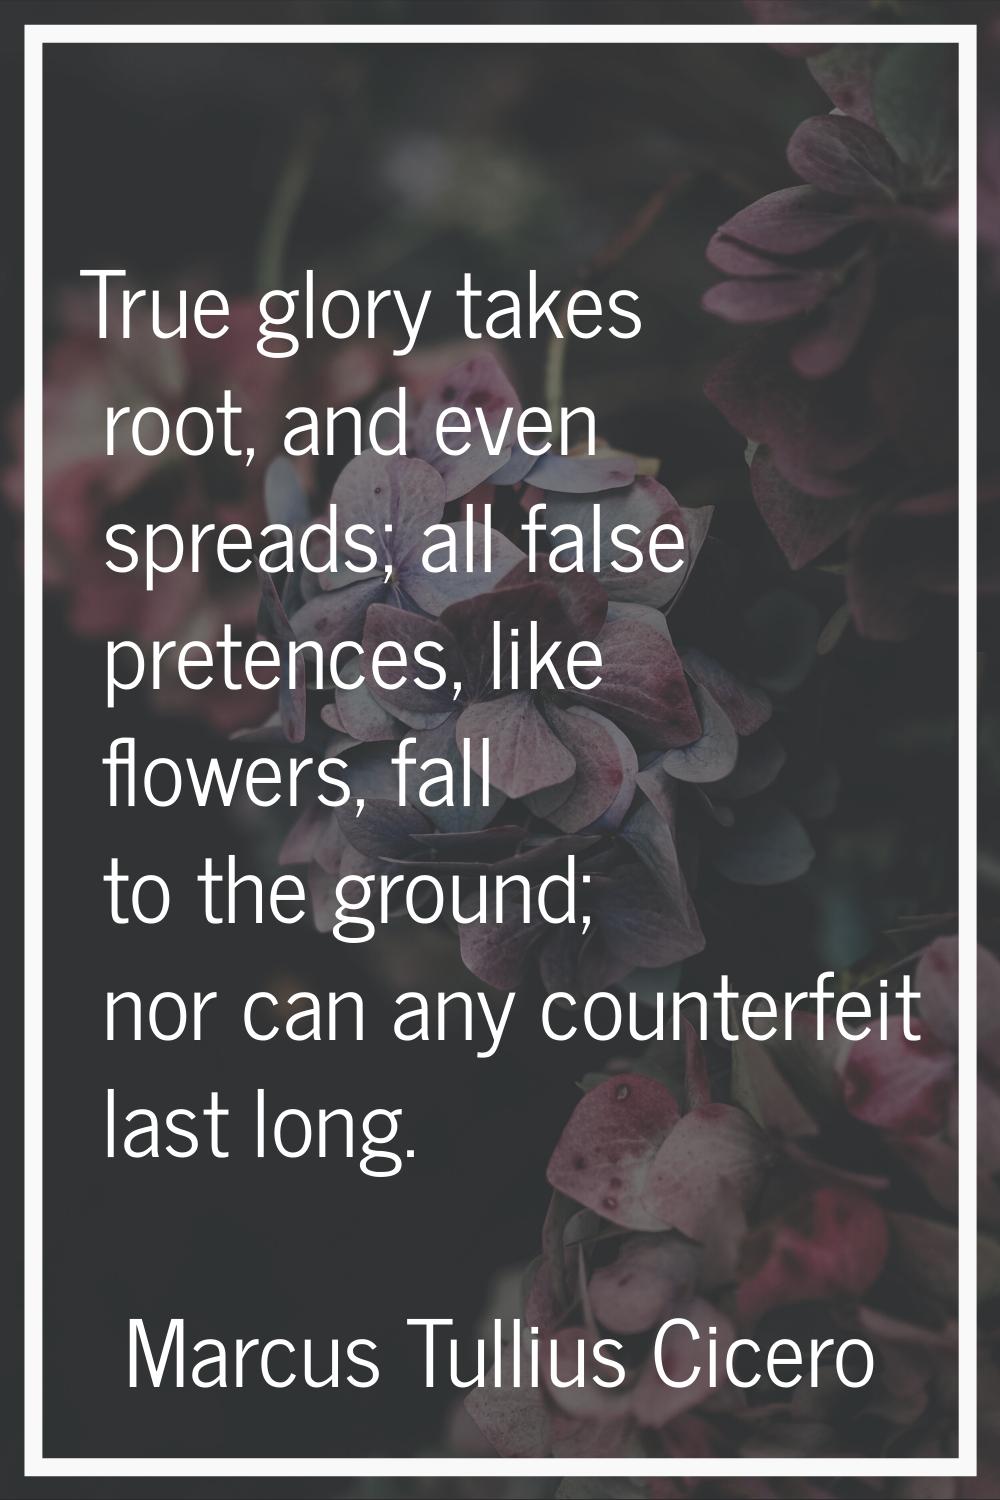 True glory takes root, and even spreads; all false pretences, like flowers, fall to the ground; nor